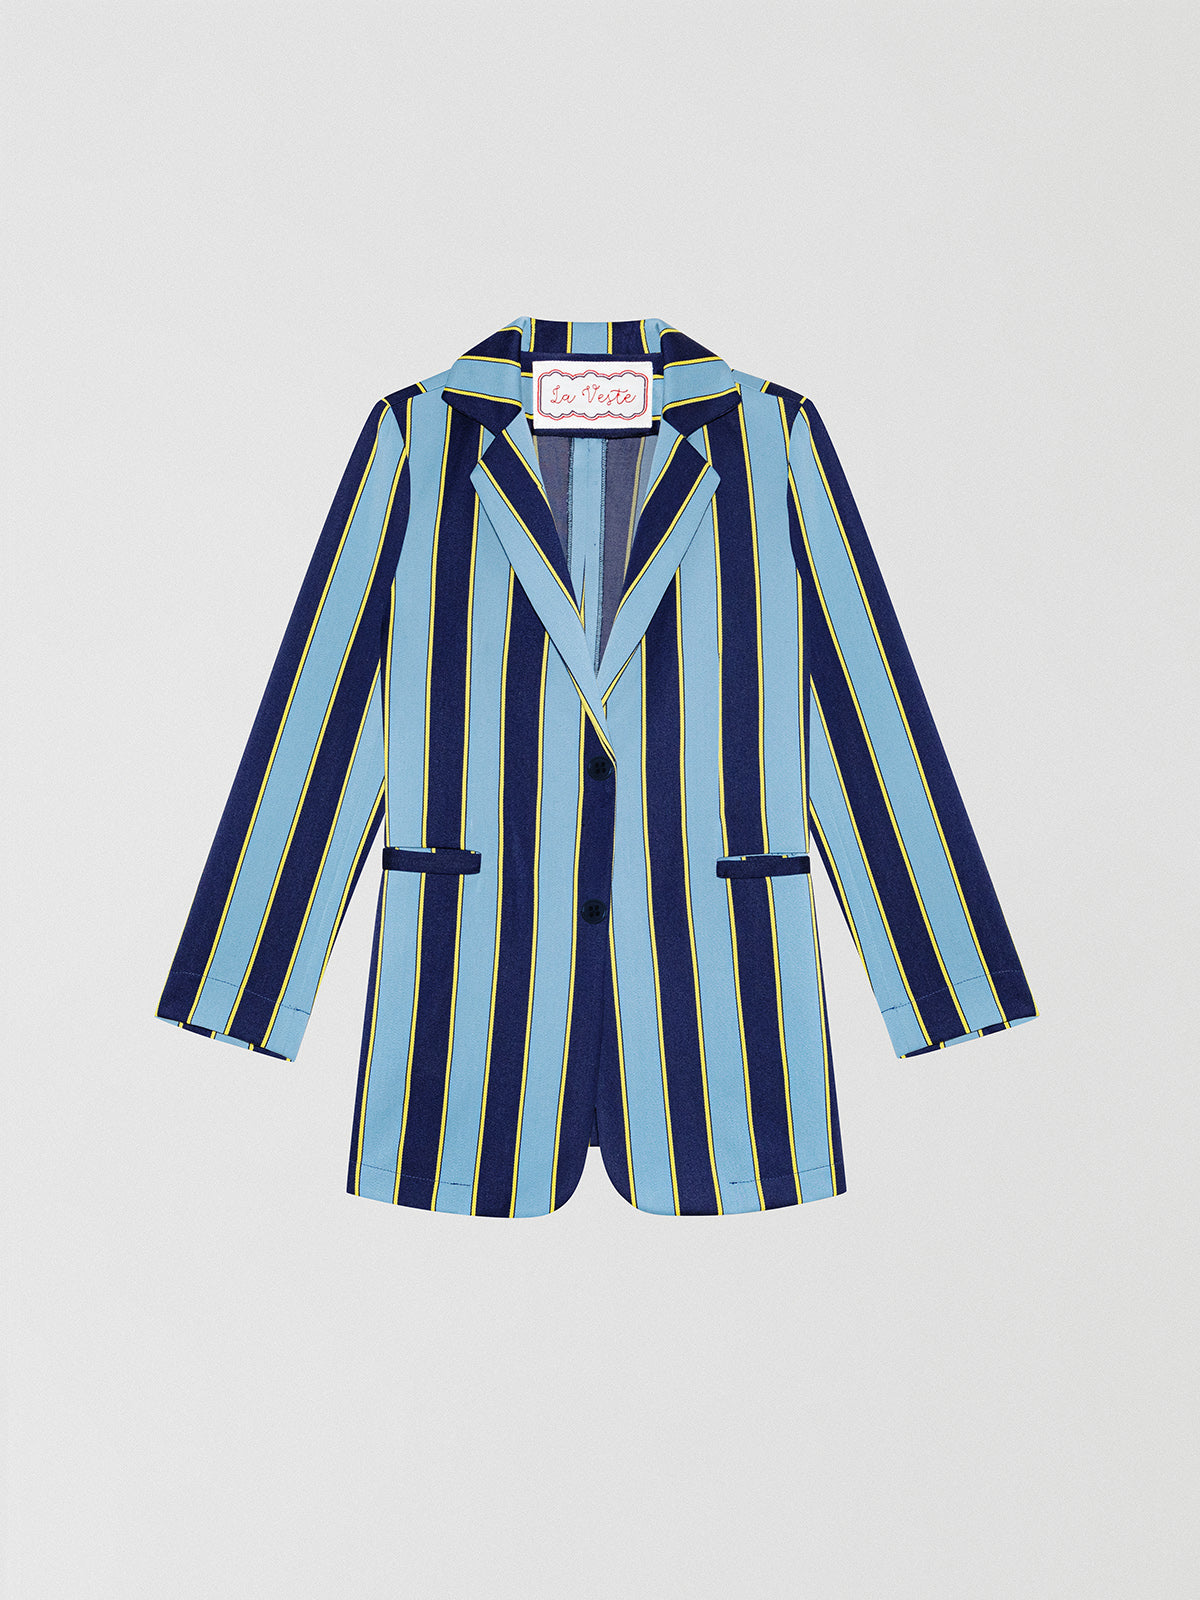 Blue, navy and yellow striped blazer in wool and cotton